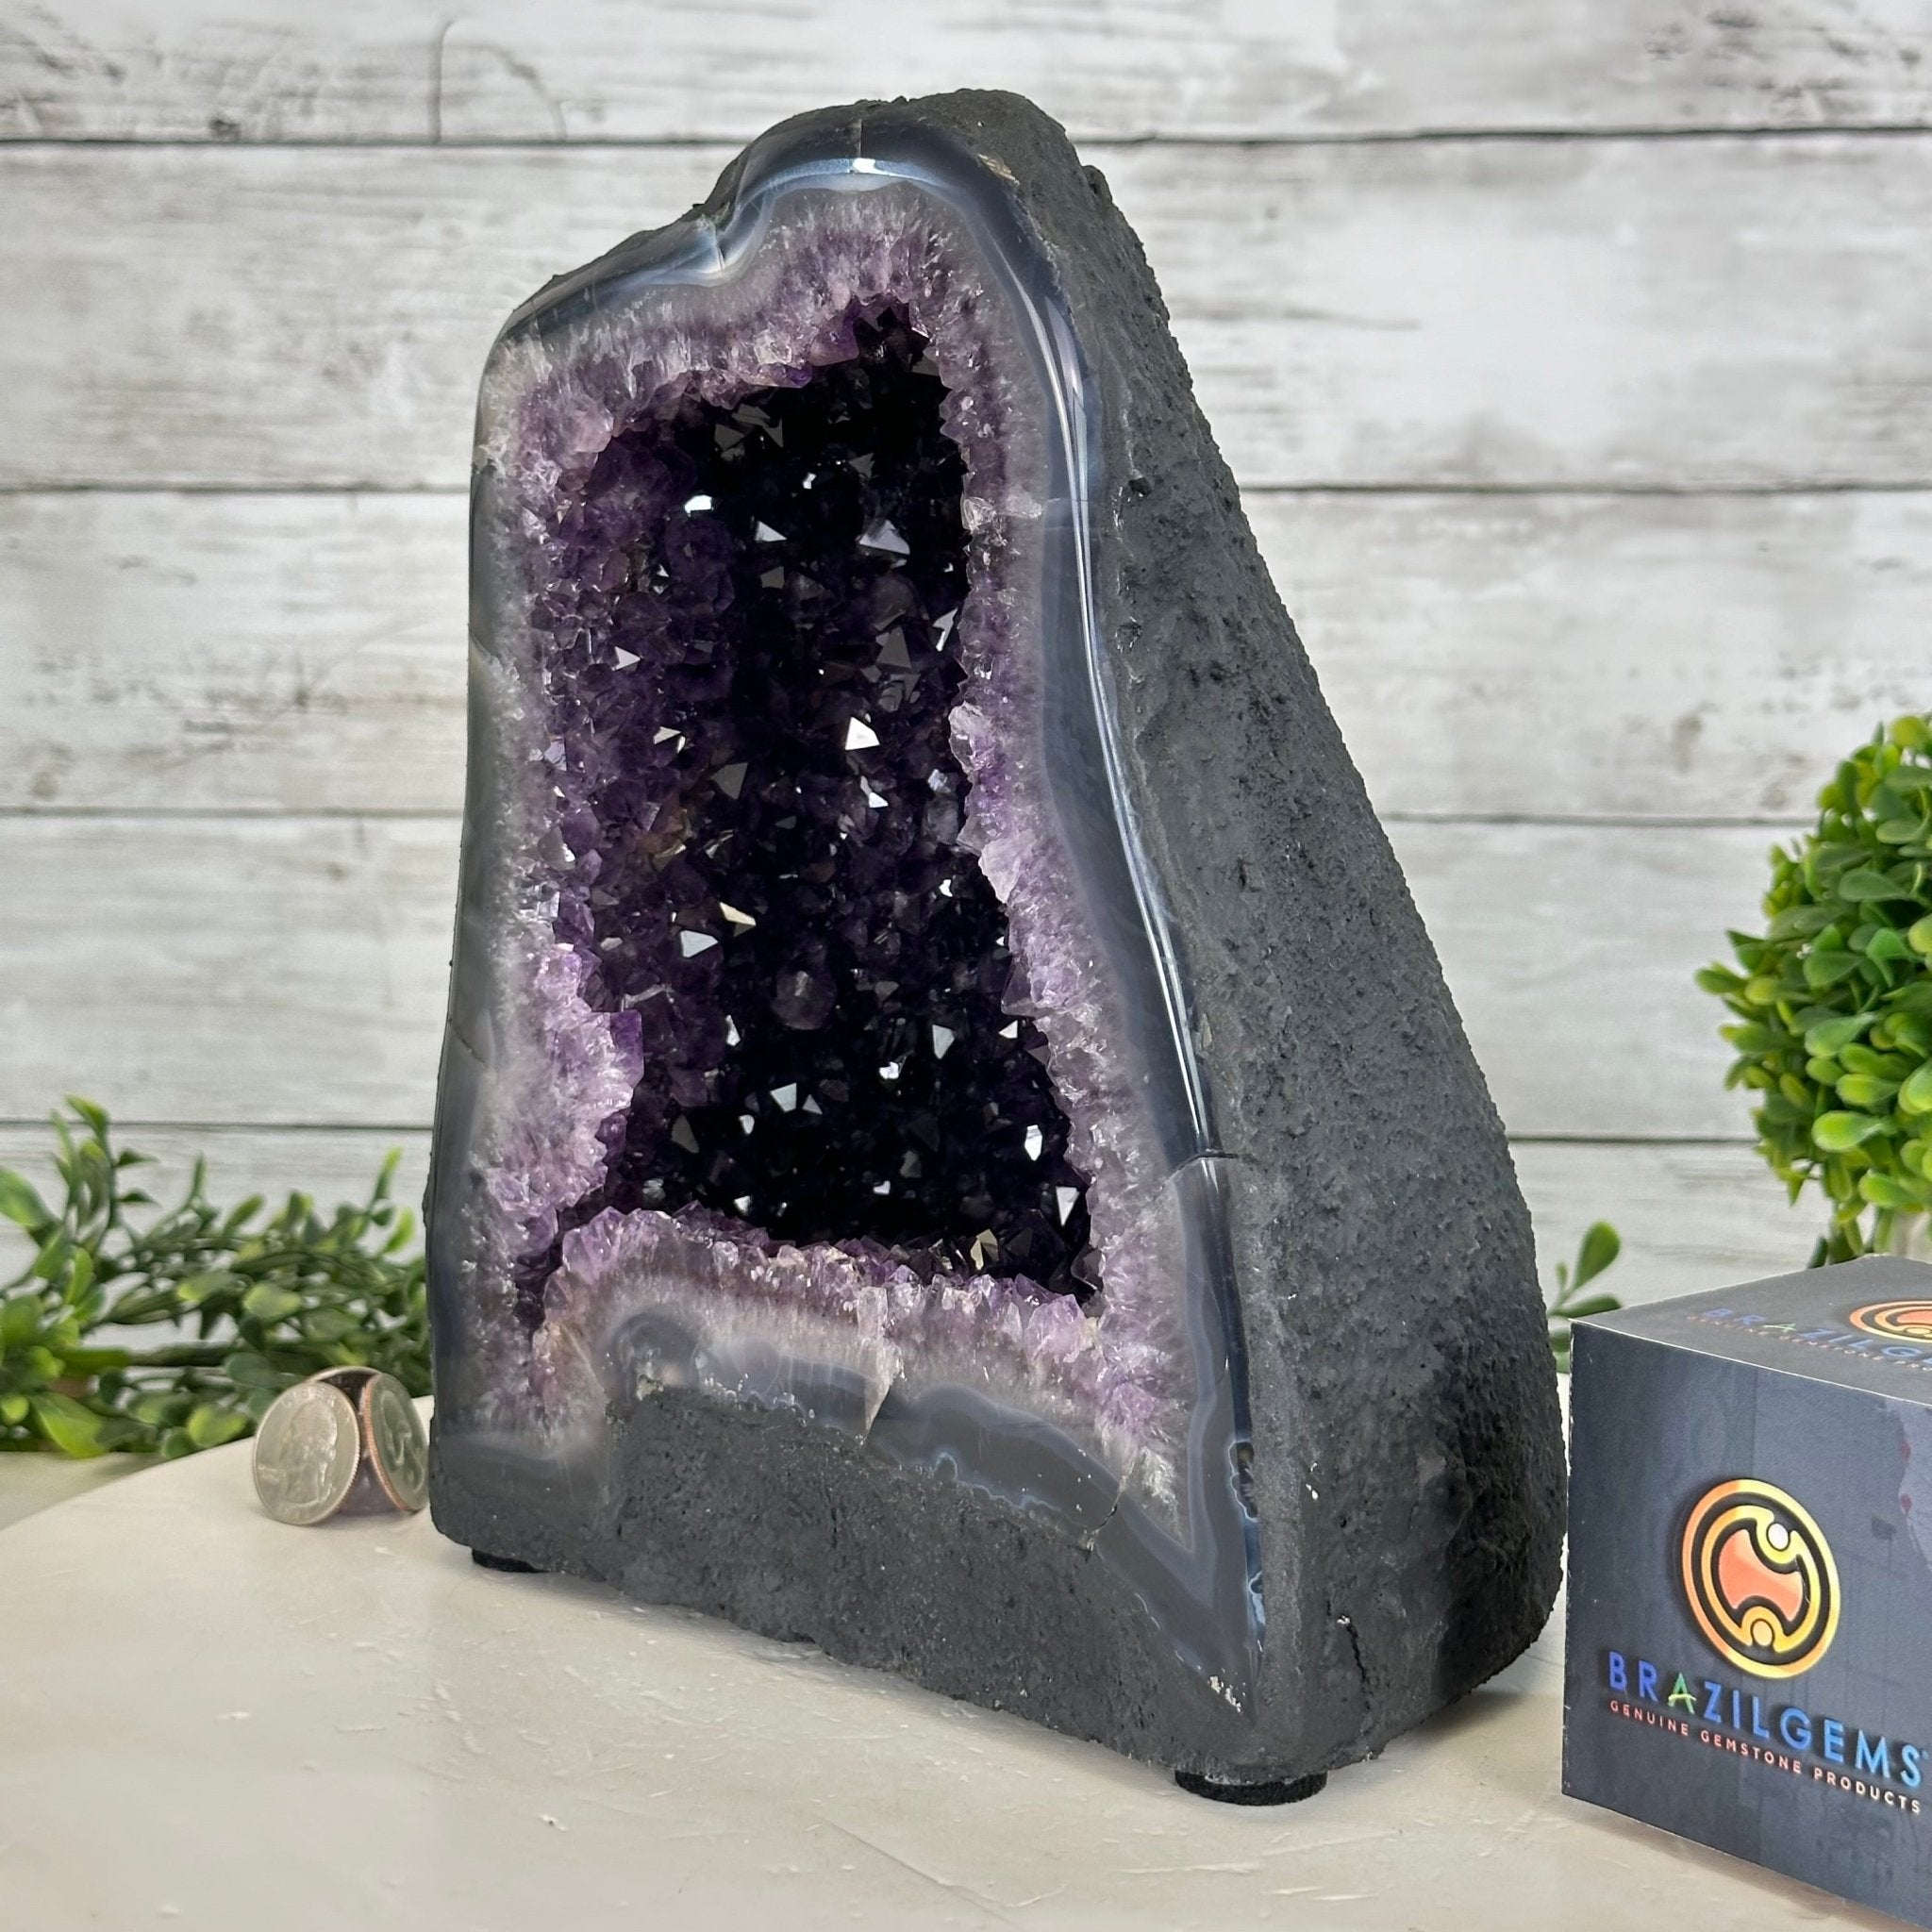 Quality Brazilian Amethyst Cathedral, 11.8 lbs & 9.1" Tall, #5601 - 1356 - Brazil GemsBrazil GemsQuality Brazilian Amethyst Cathedral, 11.8 lbs & 9.1" Tall, #5601 - 1356Cathedrals5601 - 1356